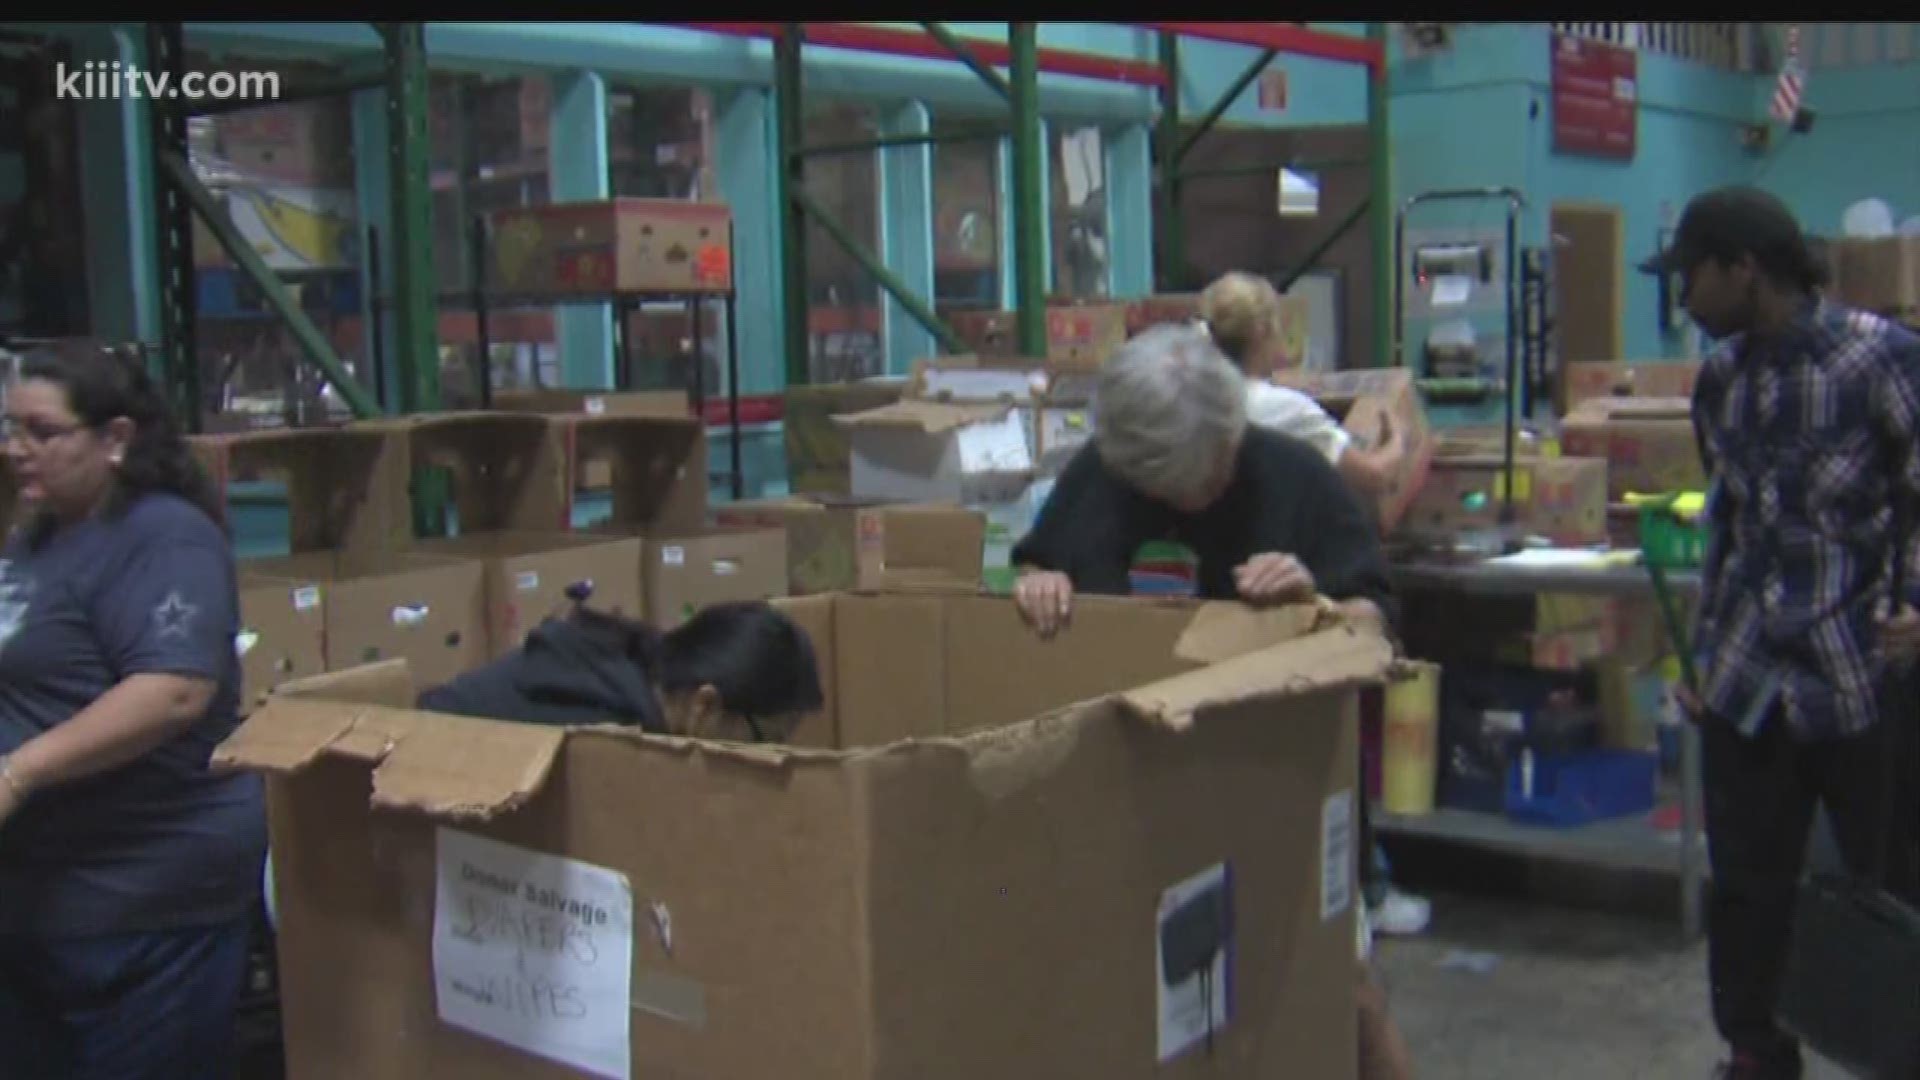 The Coastal Bend Food Bank has been a staple in the community for more than 35 years. It serves 11 counties and feeds over 400,000 people each year.